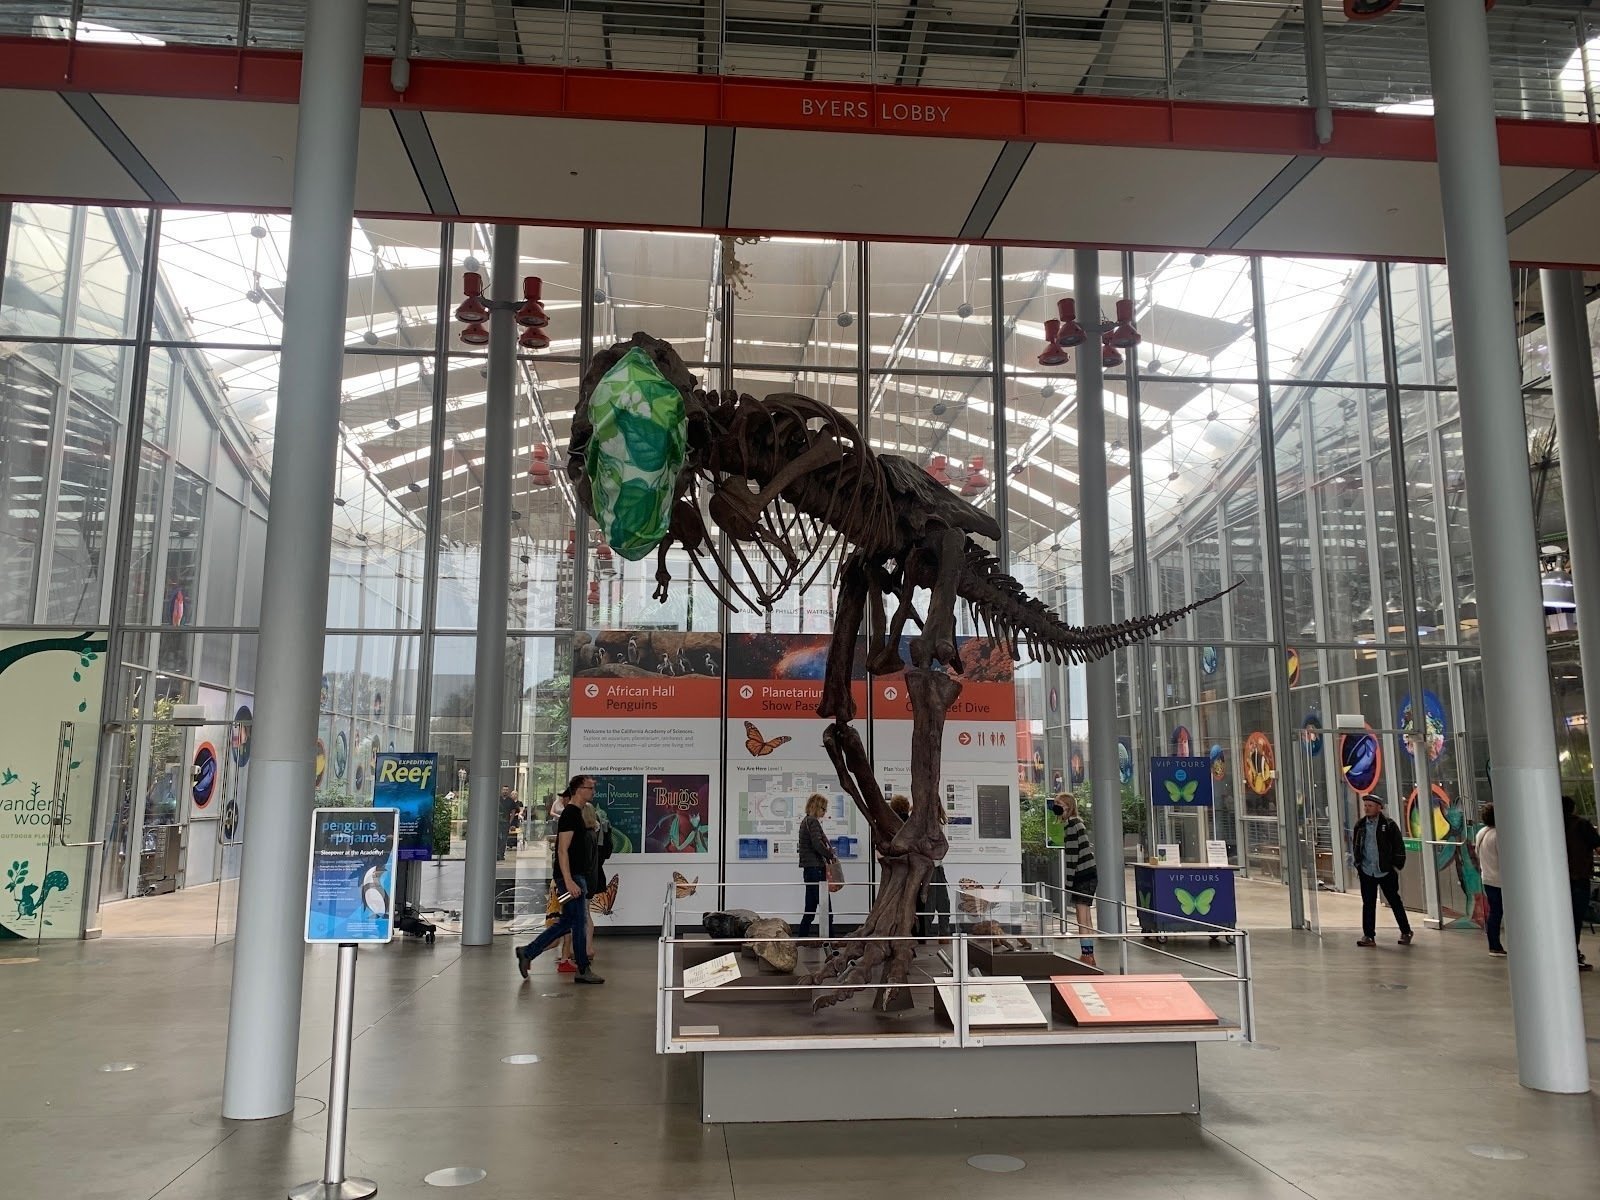 <span class="translation_missing" title="translation missing: en.meta.location_title, location_name: California Academy of Sciences, city: San Francisco">Location Title</span>